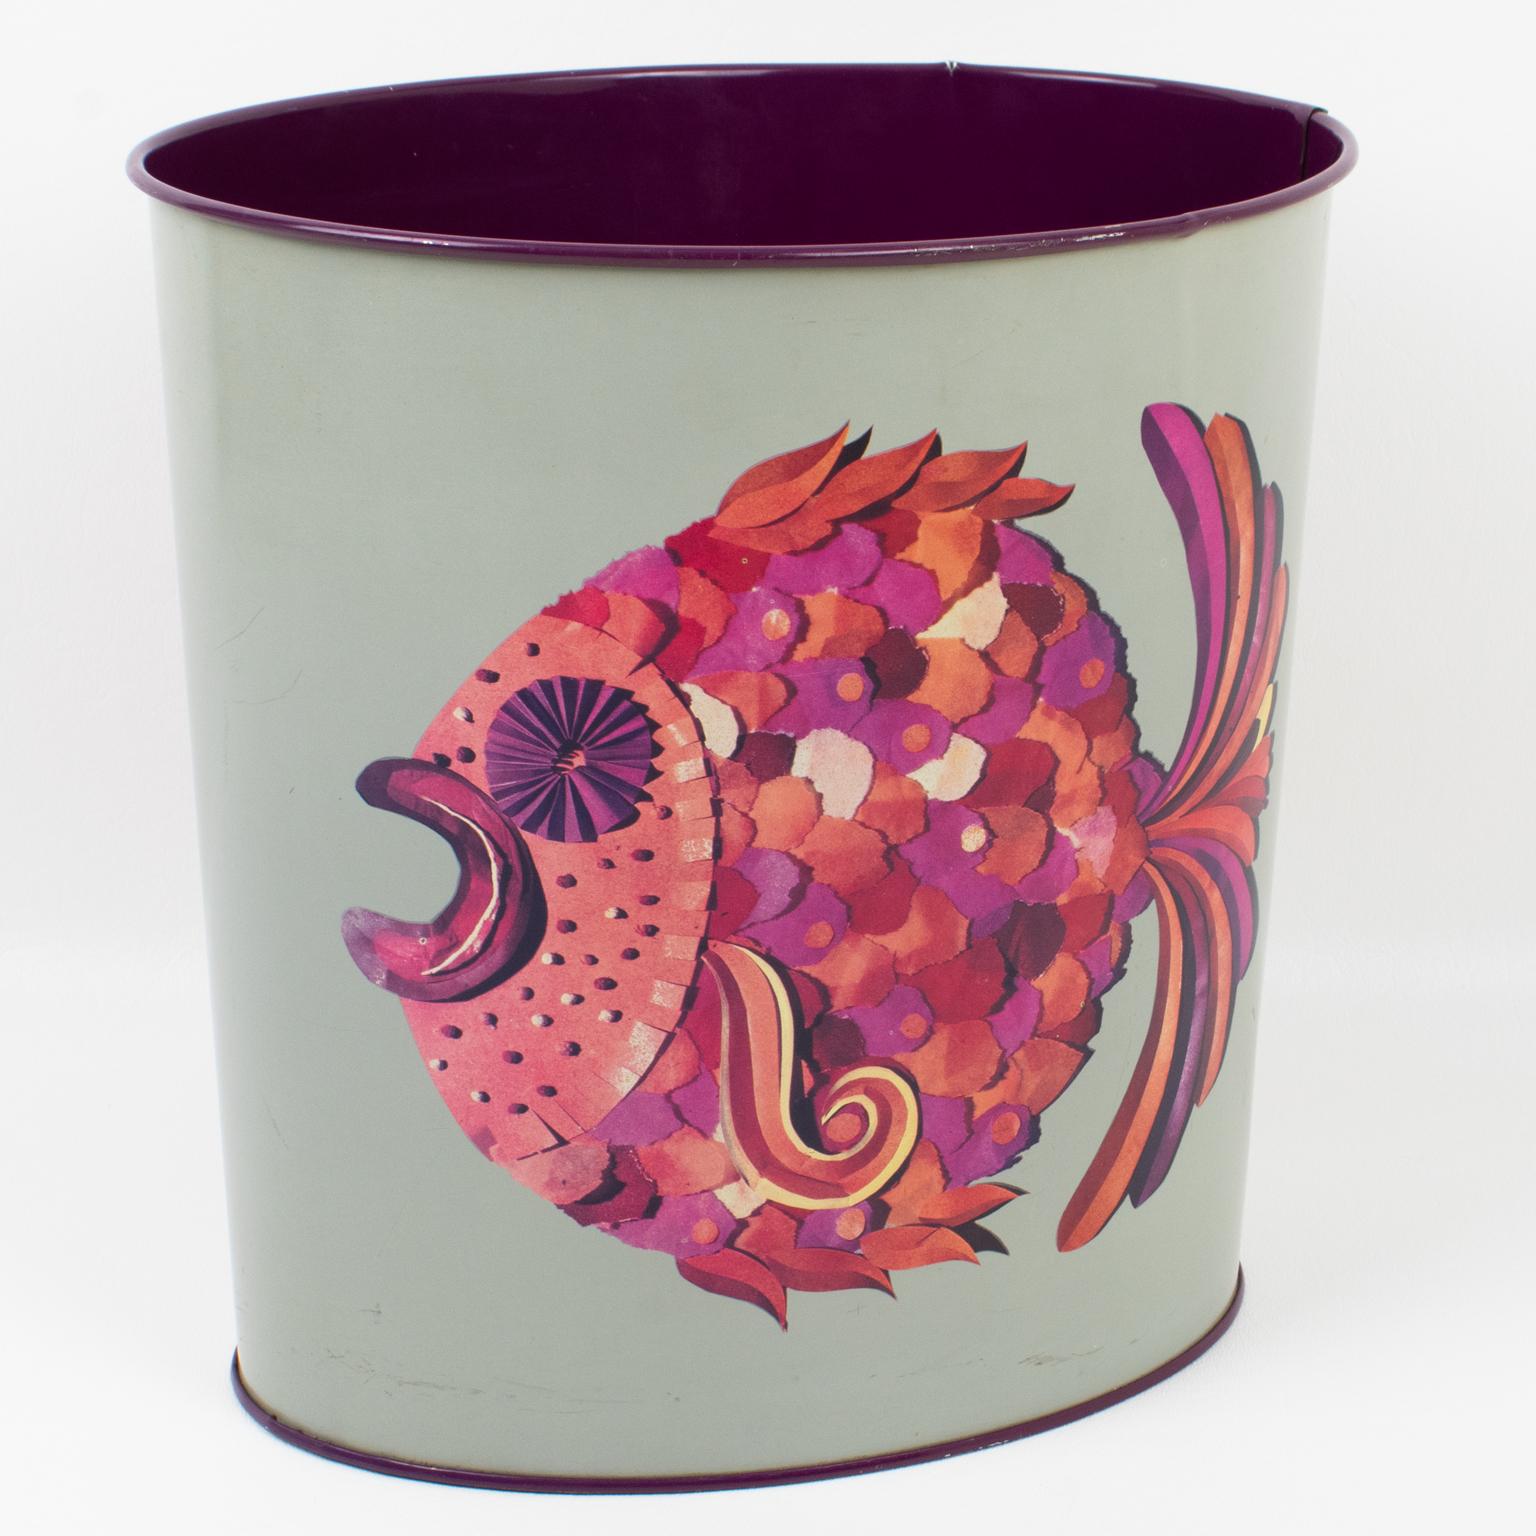 A functional 1960s Mid-Century-Modern desk accessory, office waste-basket designed by Tomado, Holland. The oval shape boasts a light gray metal structure with a typical polychrome modernist design of exotic fishes in purple, pink, and red colors.